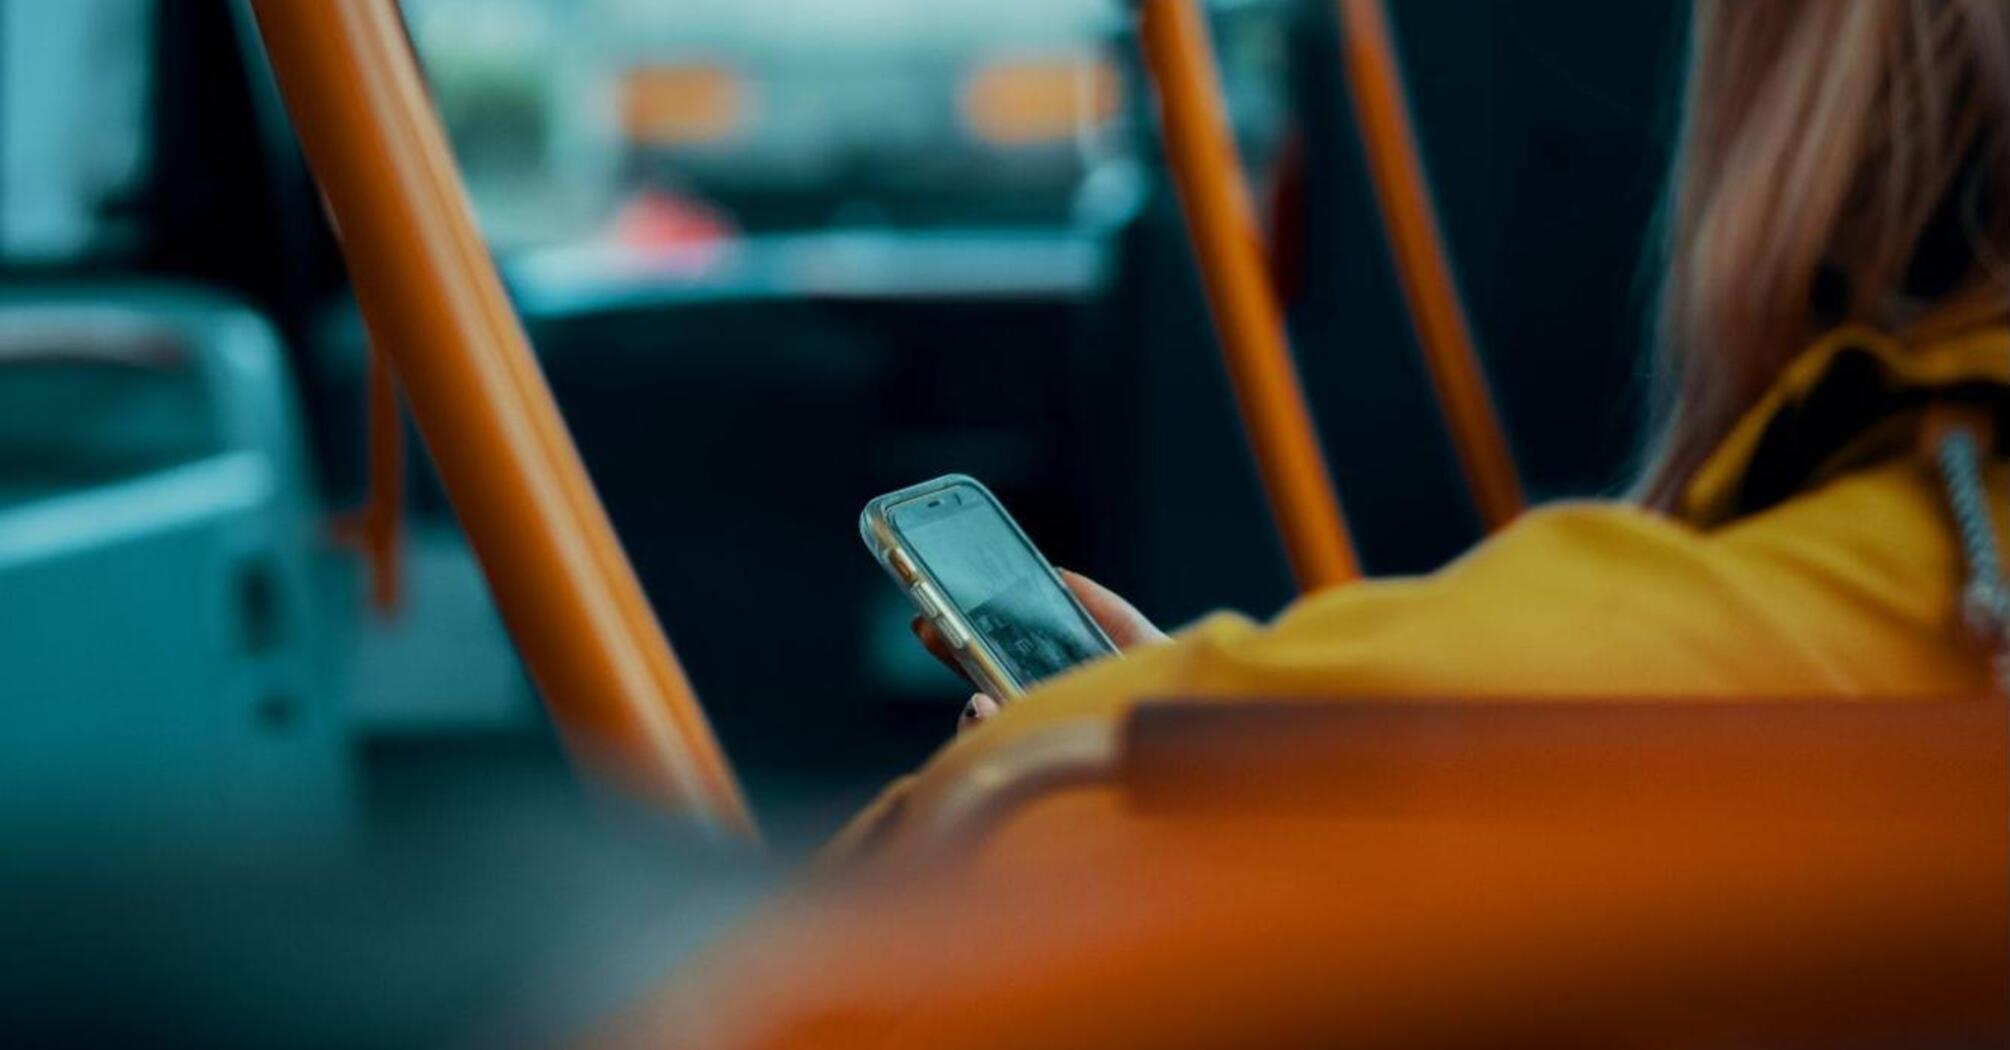 A person in a yellow jacket using a smartphone while sitting on a bus